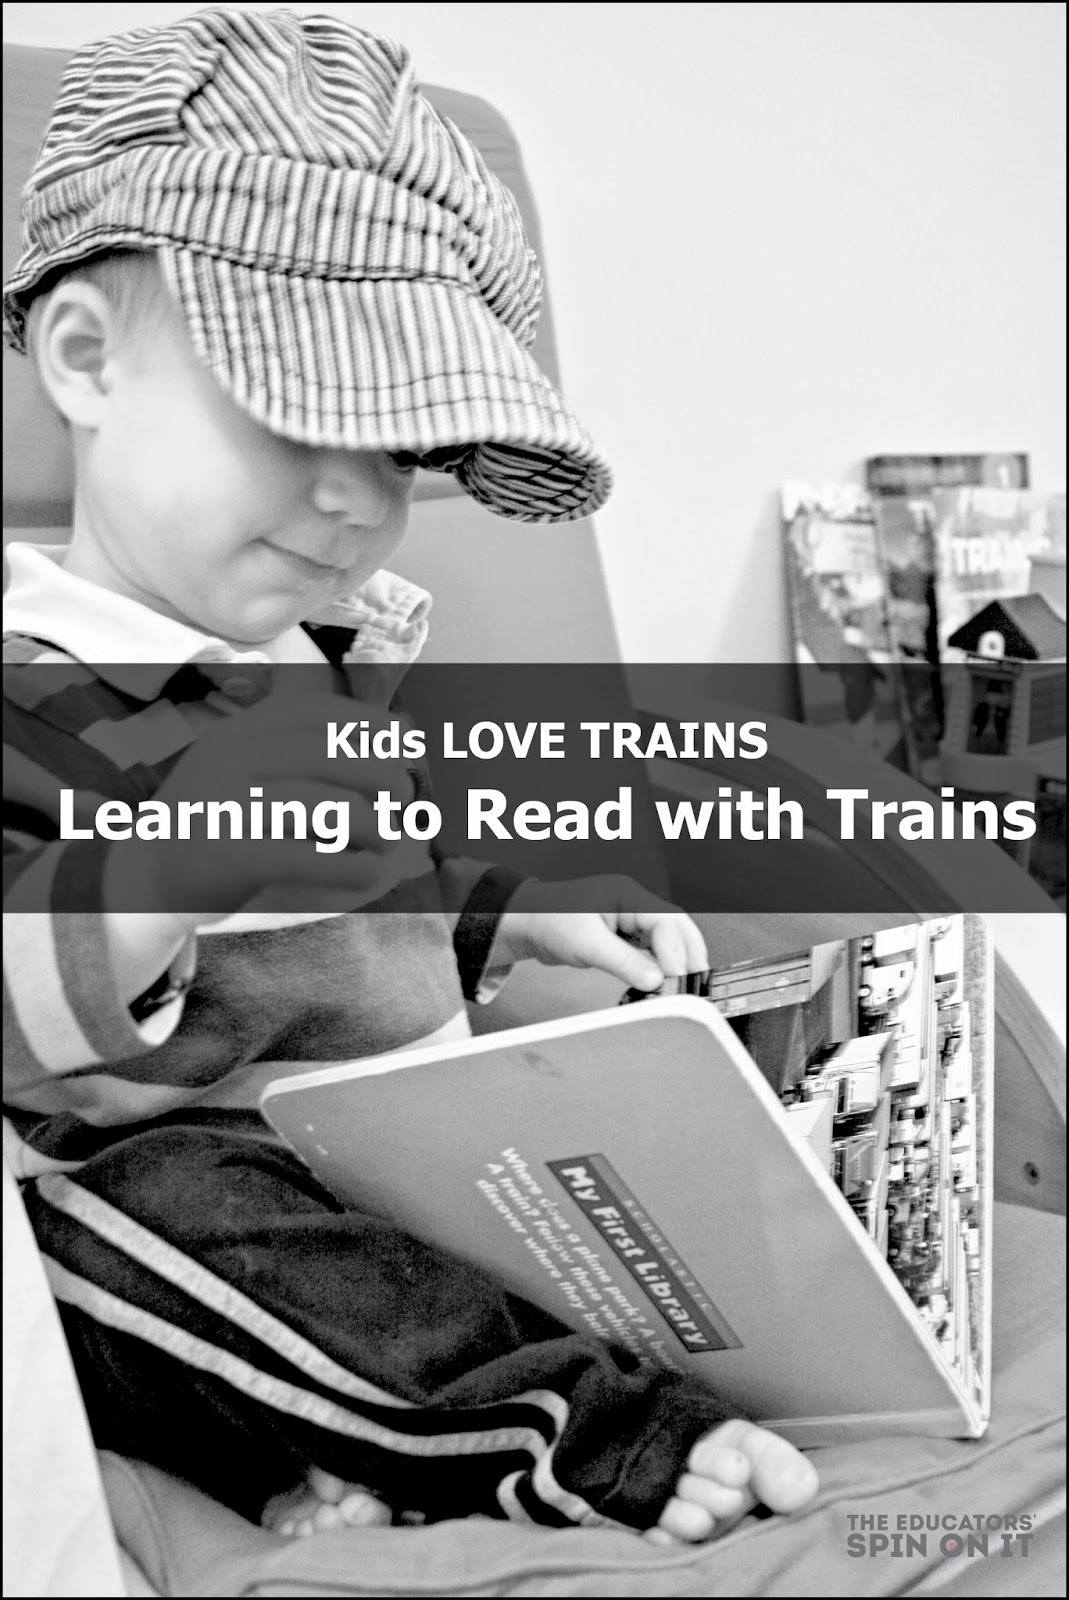 Little train enthusiasts getting excited about learning to read